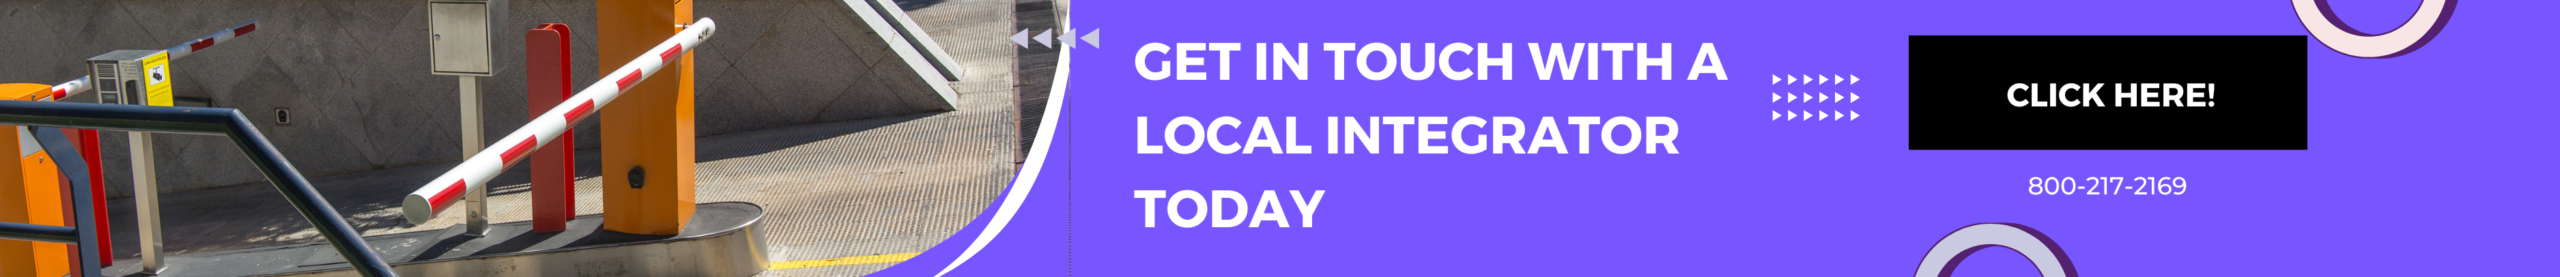 get in tough with a local integrator today